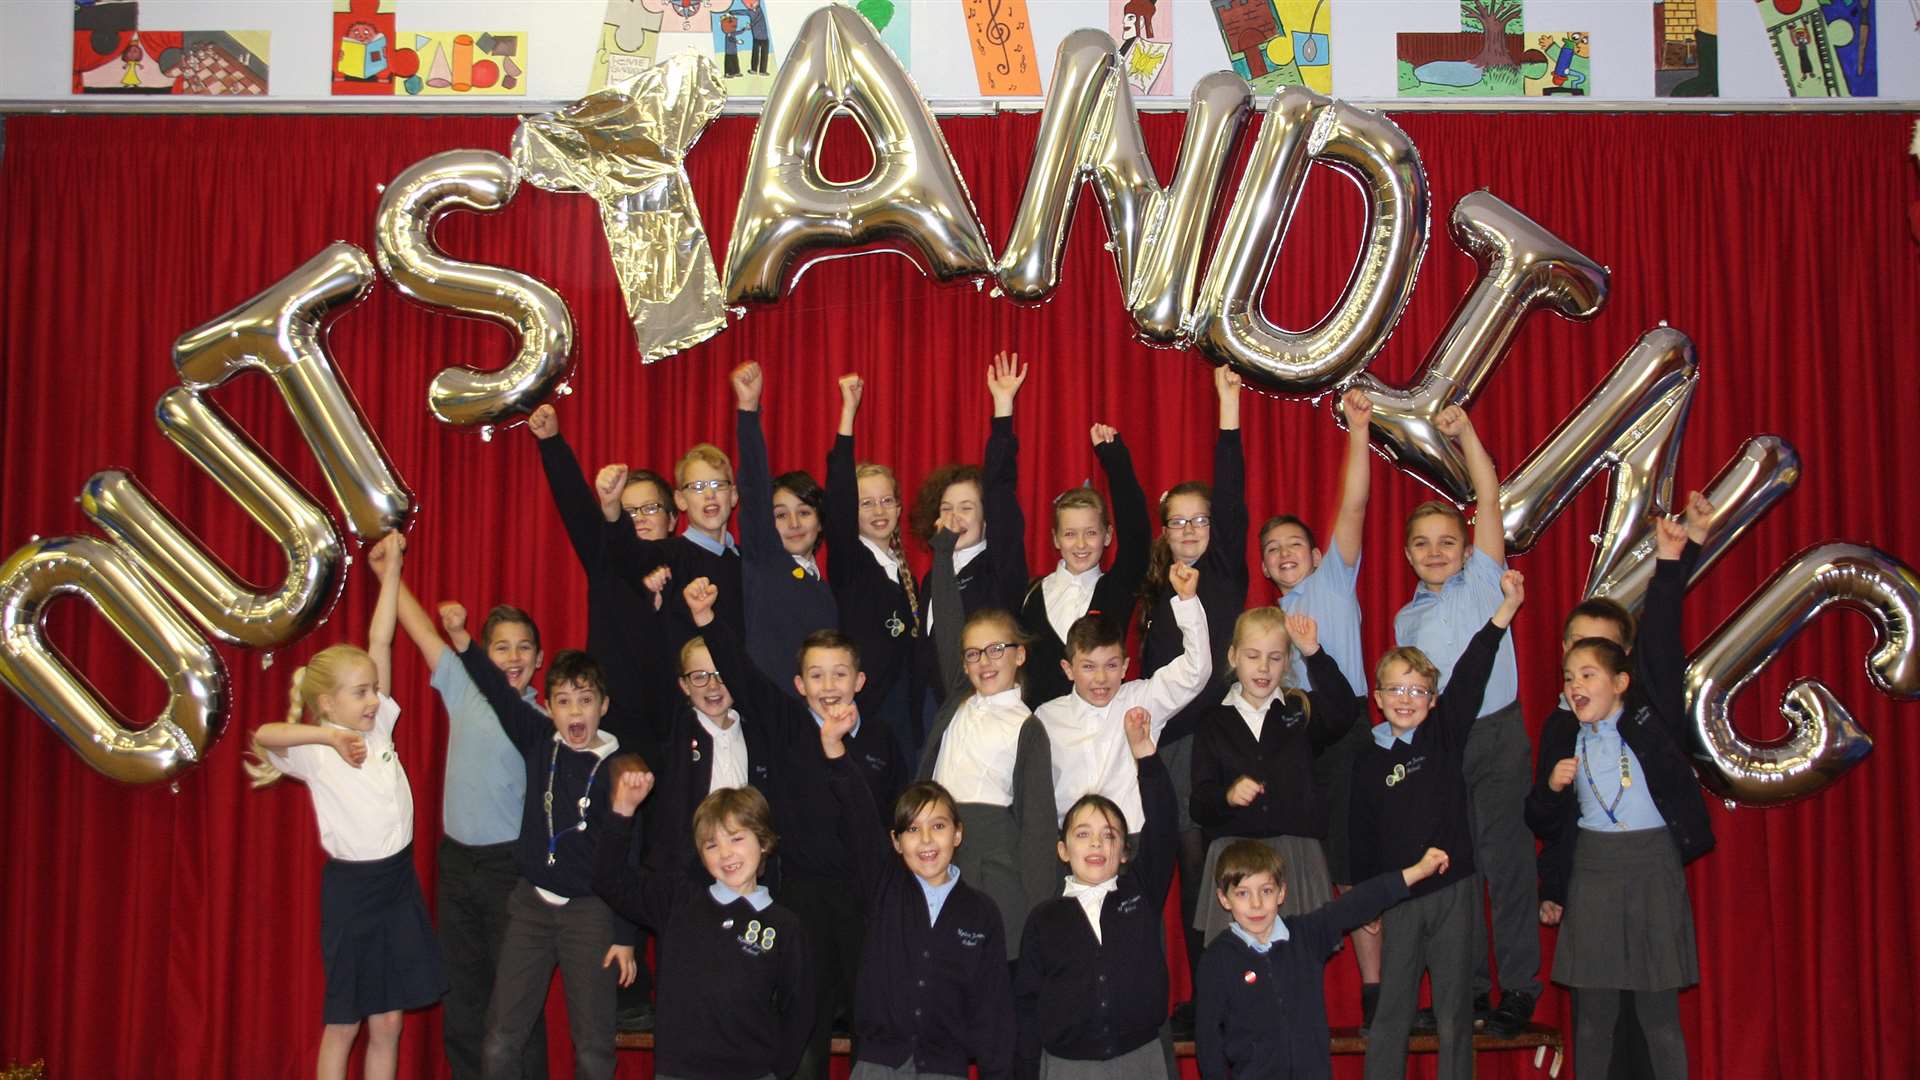 Staff and pupils at Upton Junior School in Broadstairs celebrate their Ofsted result